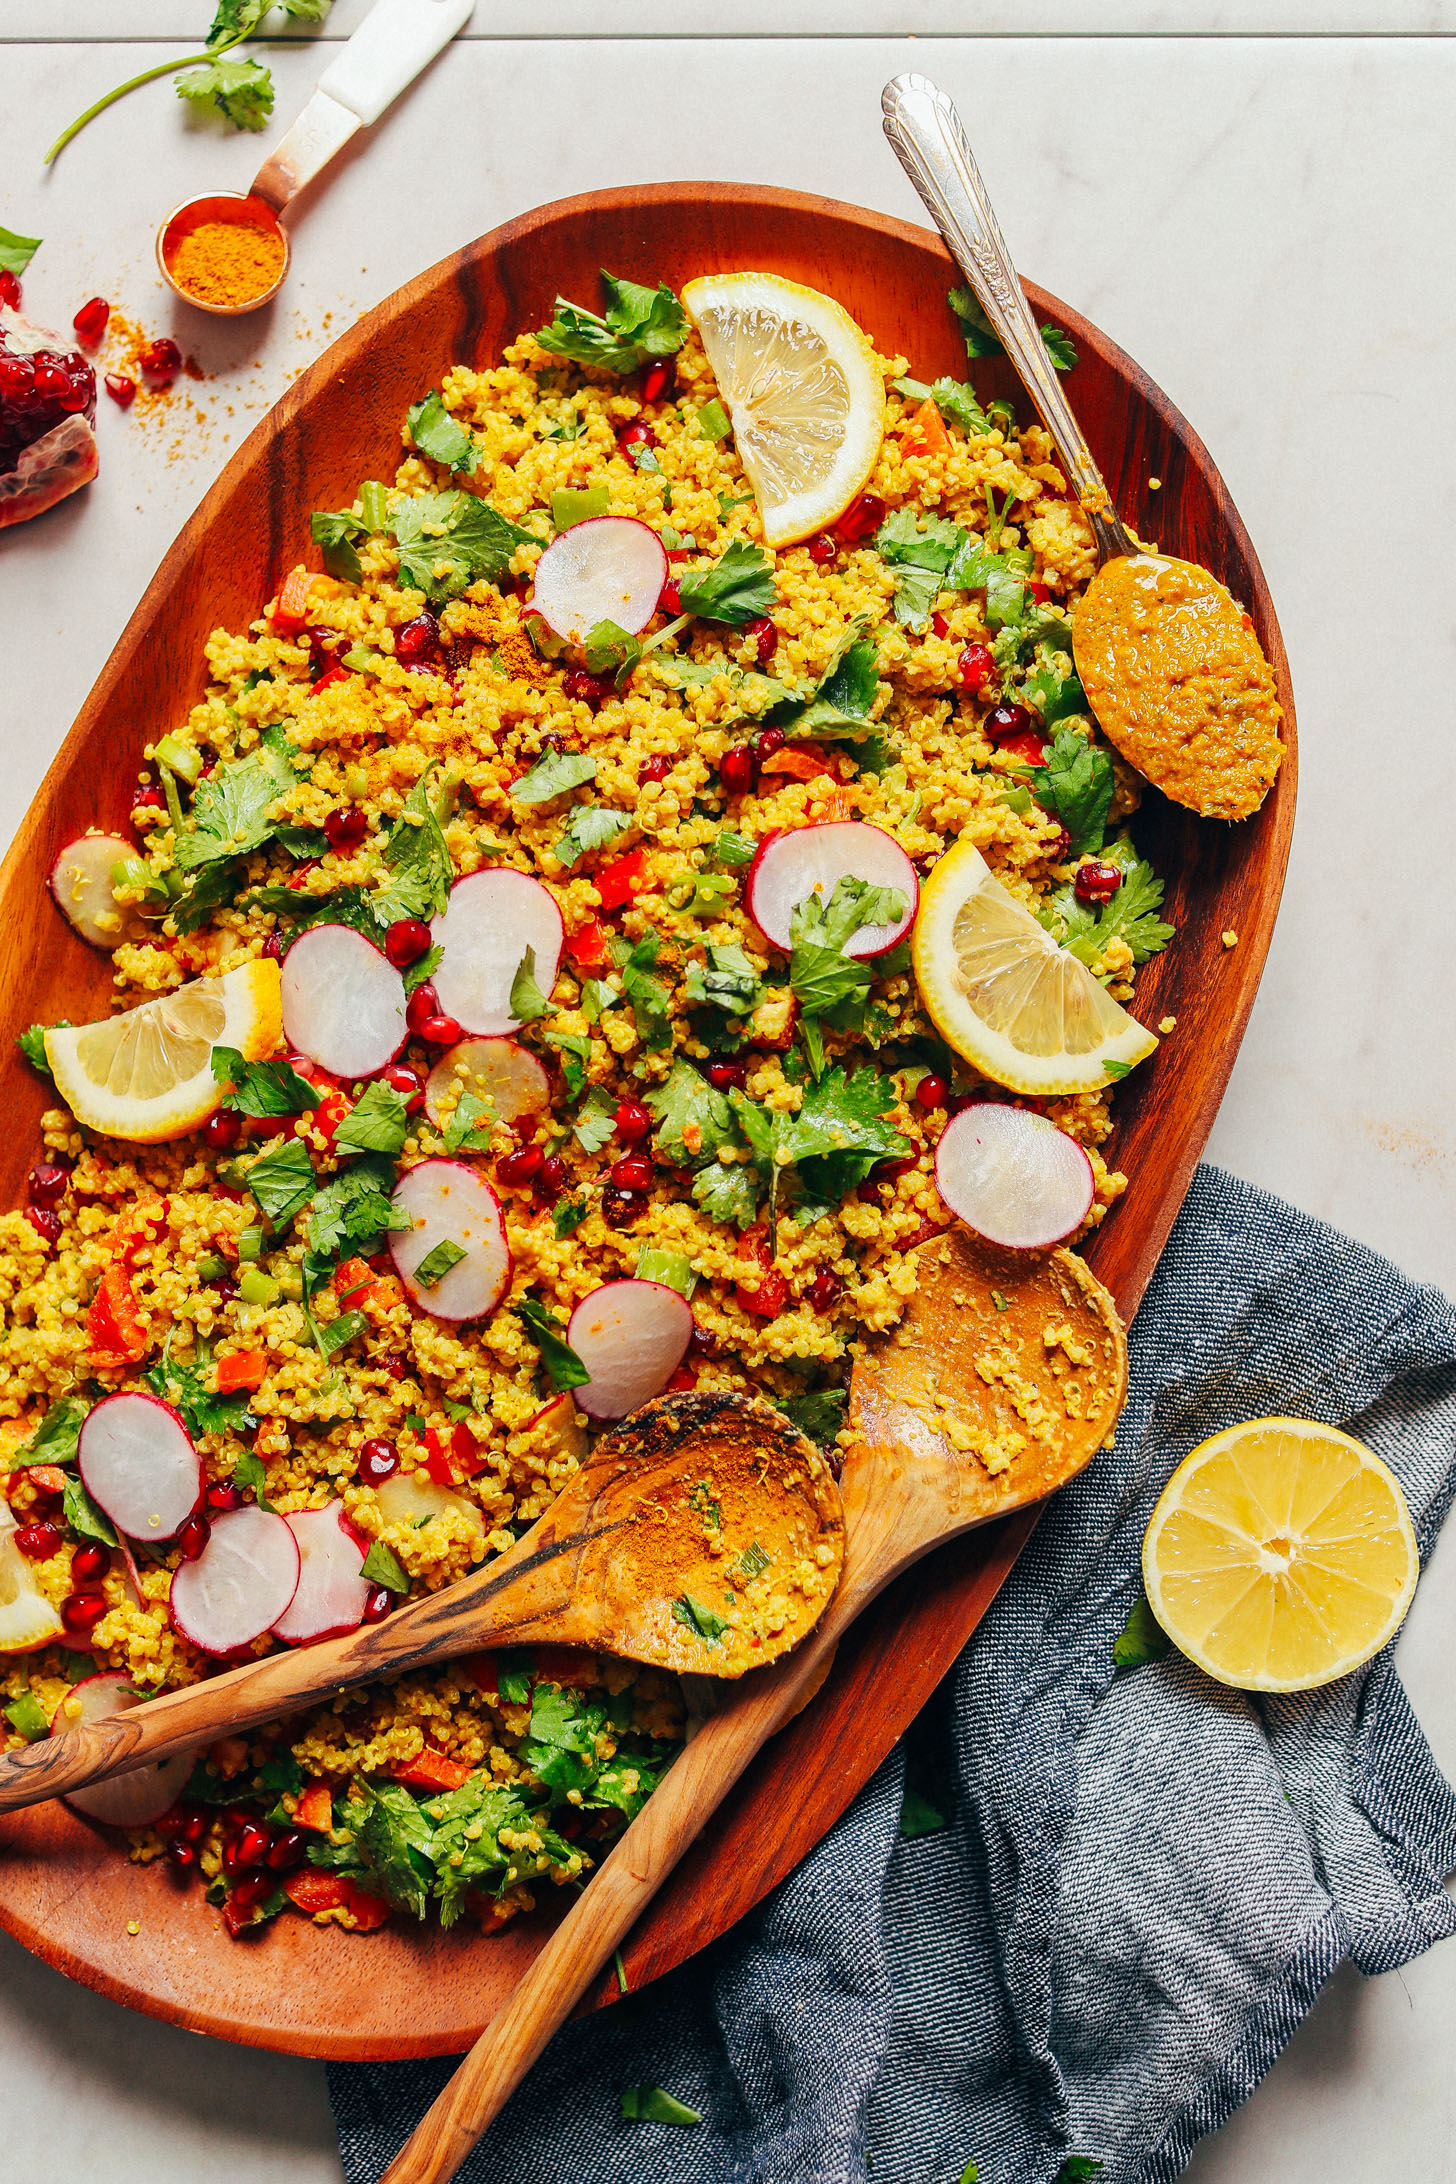 Large wood platter with Curried Quinoa Salad served with fresh vegetables and lemon slices